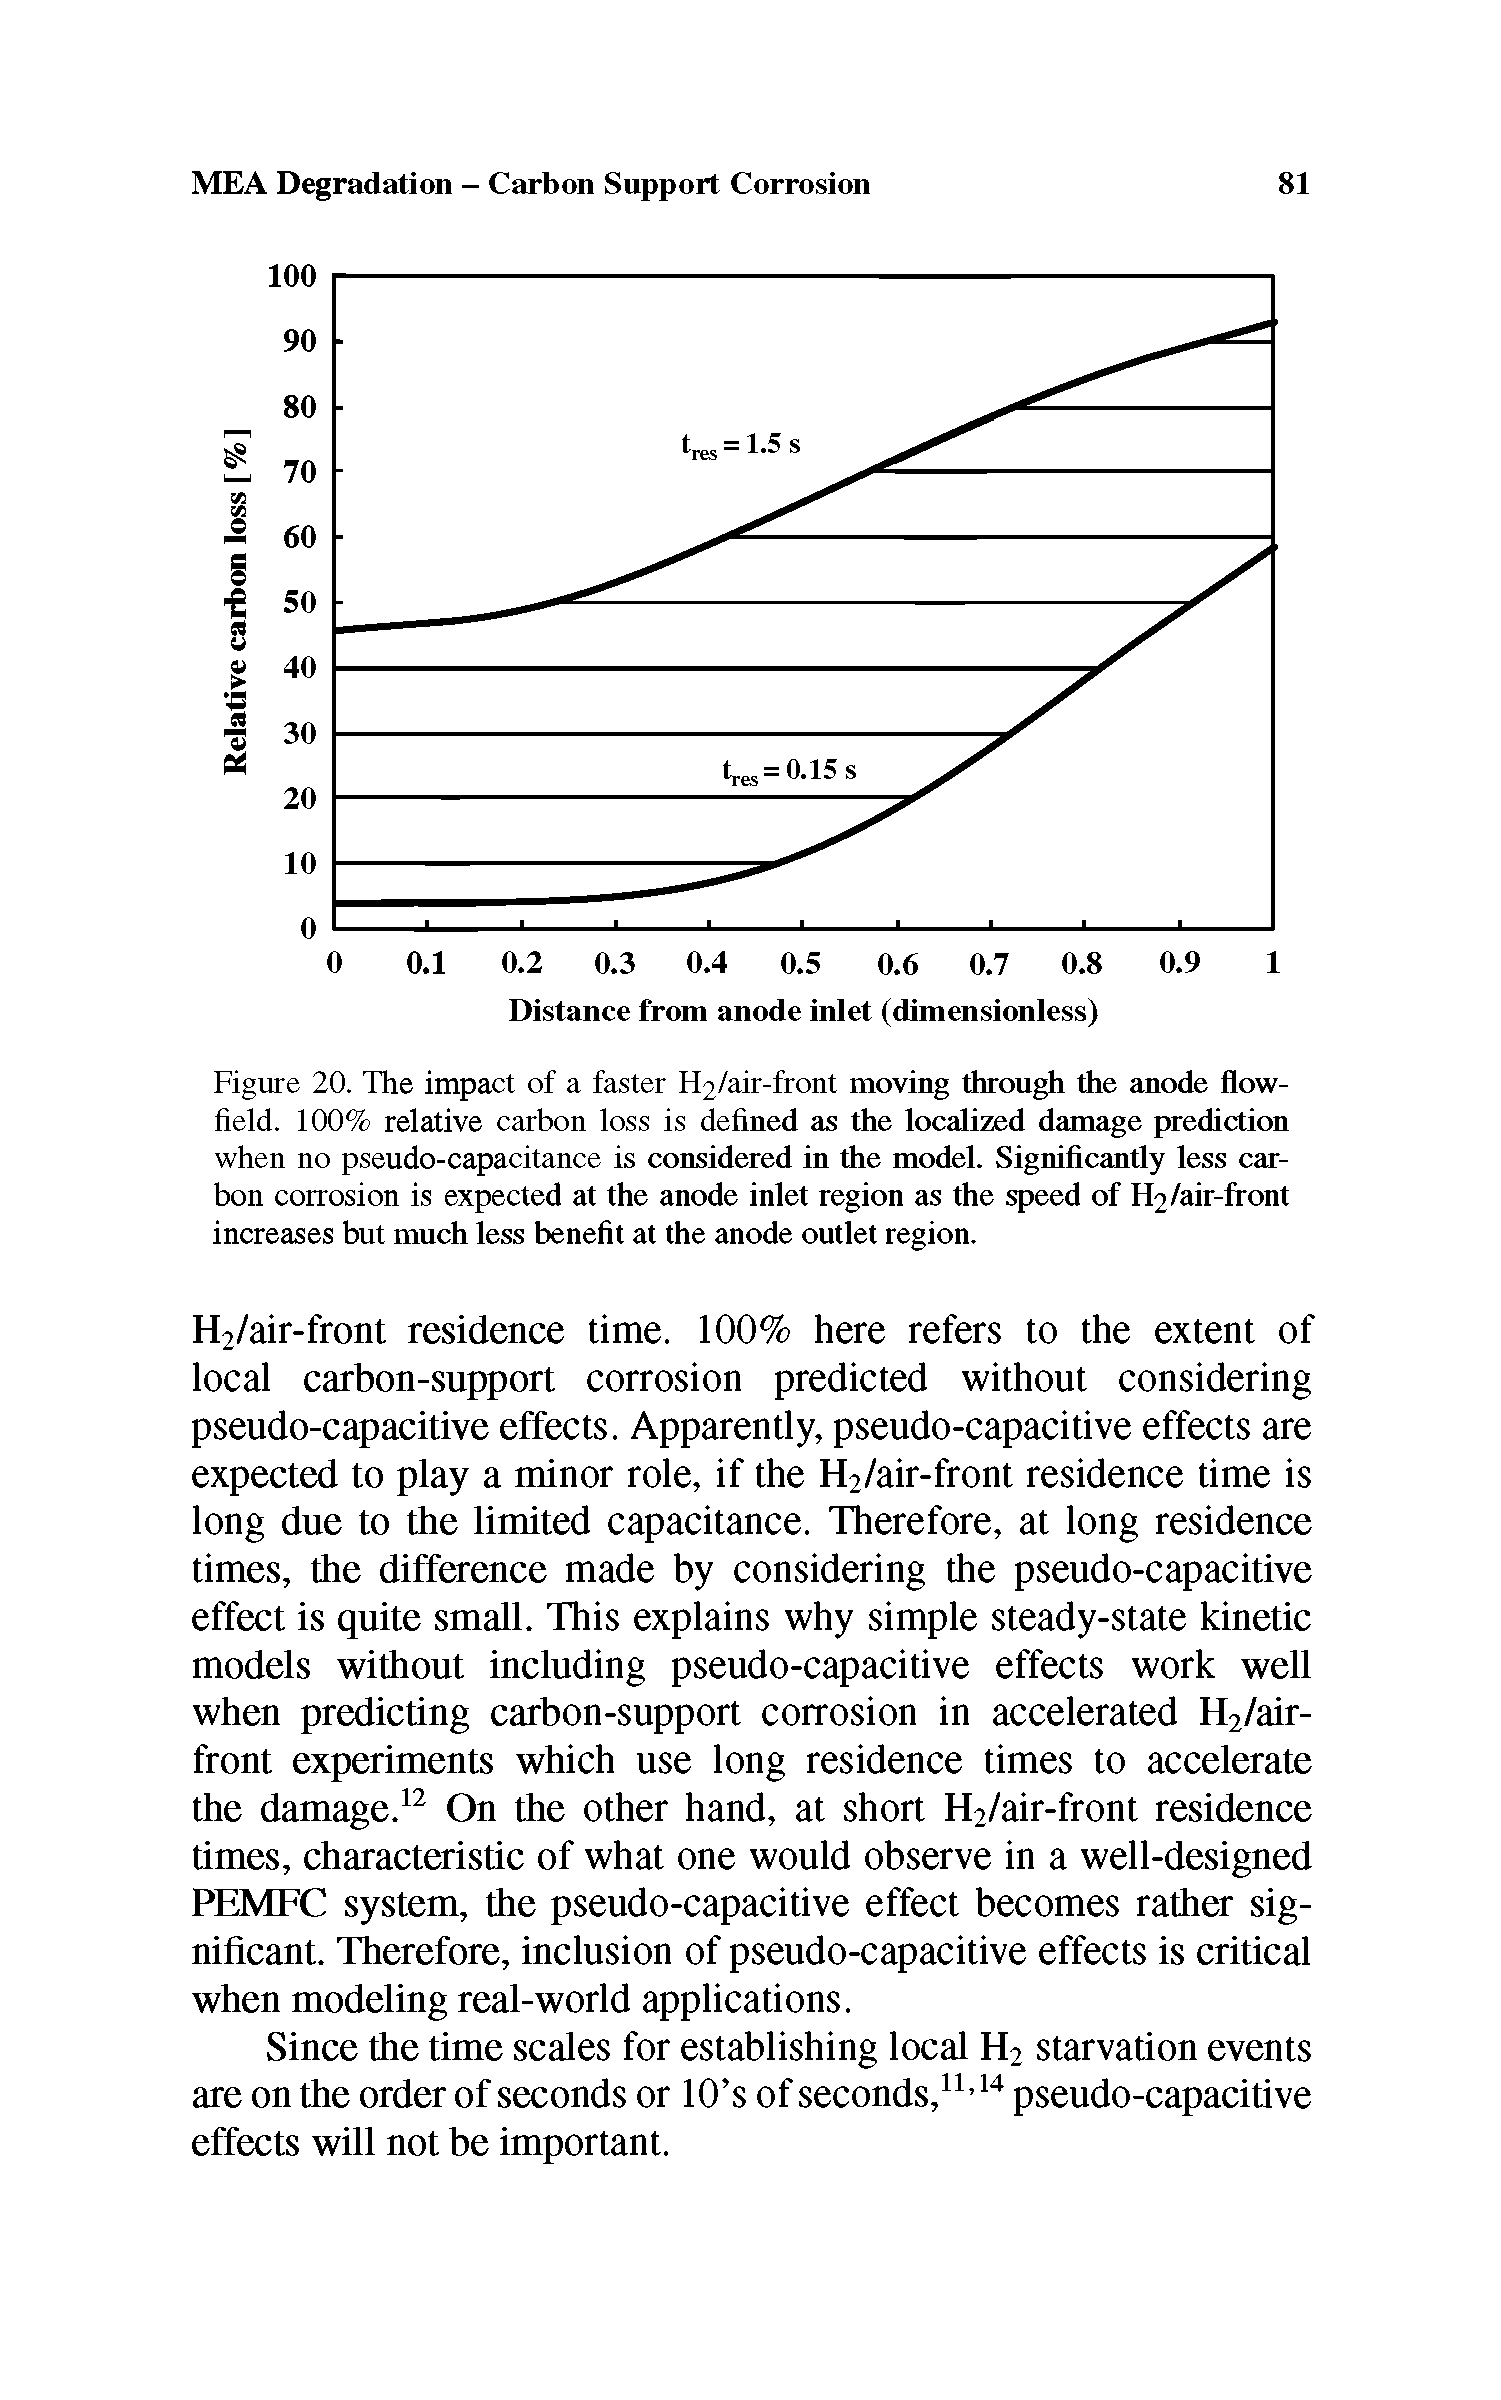 Figure 20. The impact of a faster H2/air-front moving through die anode flow-field. 100% relative carbon loss is defined as the localized damage prediction when no pseudo-capacitance is considered in die model. Significantly less carbon corrosion is expected at the anode inlet region as the speed of H2/air-front increases but much less benefit at the anode outlet region.